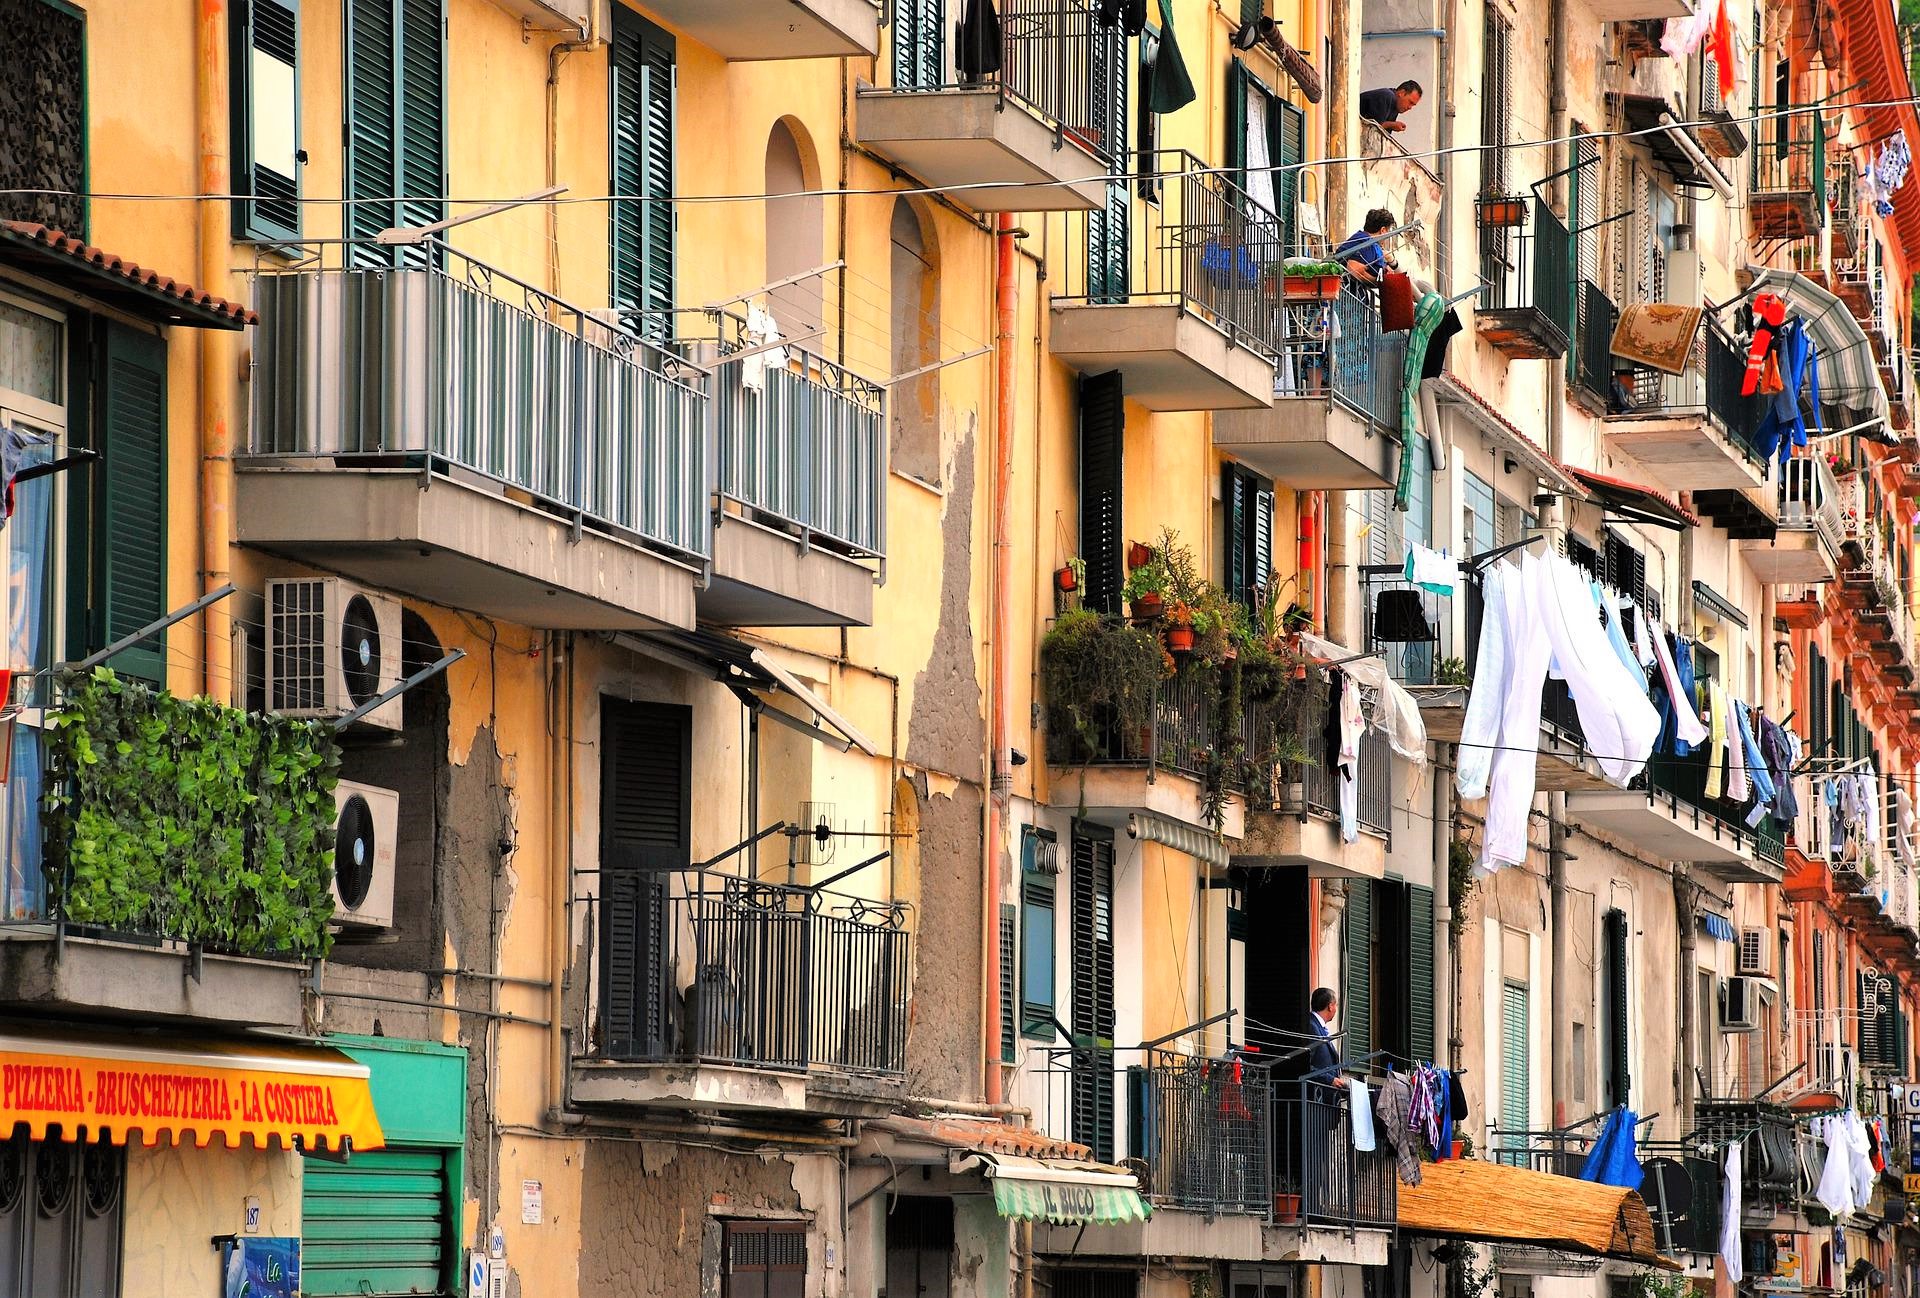 The colourful walls of the apartments in Naples, where washing lines adorn the balconies.